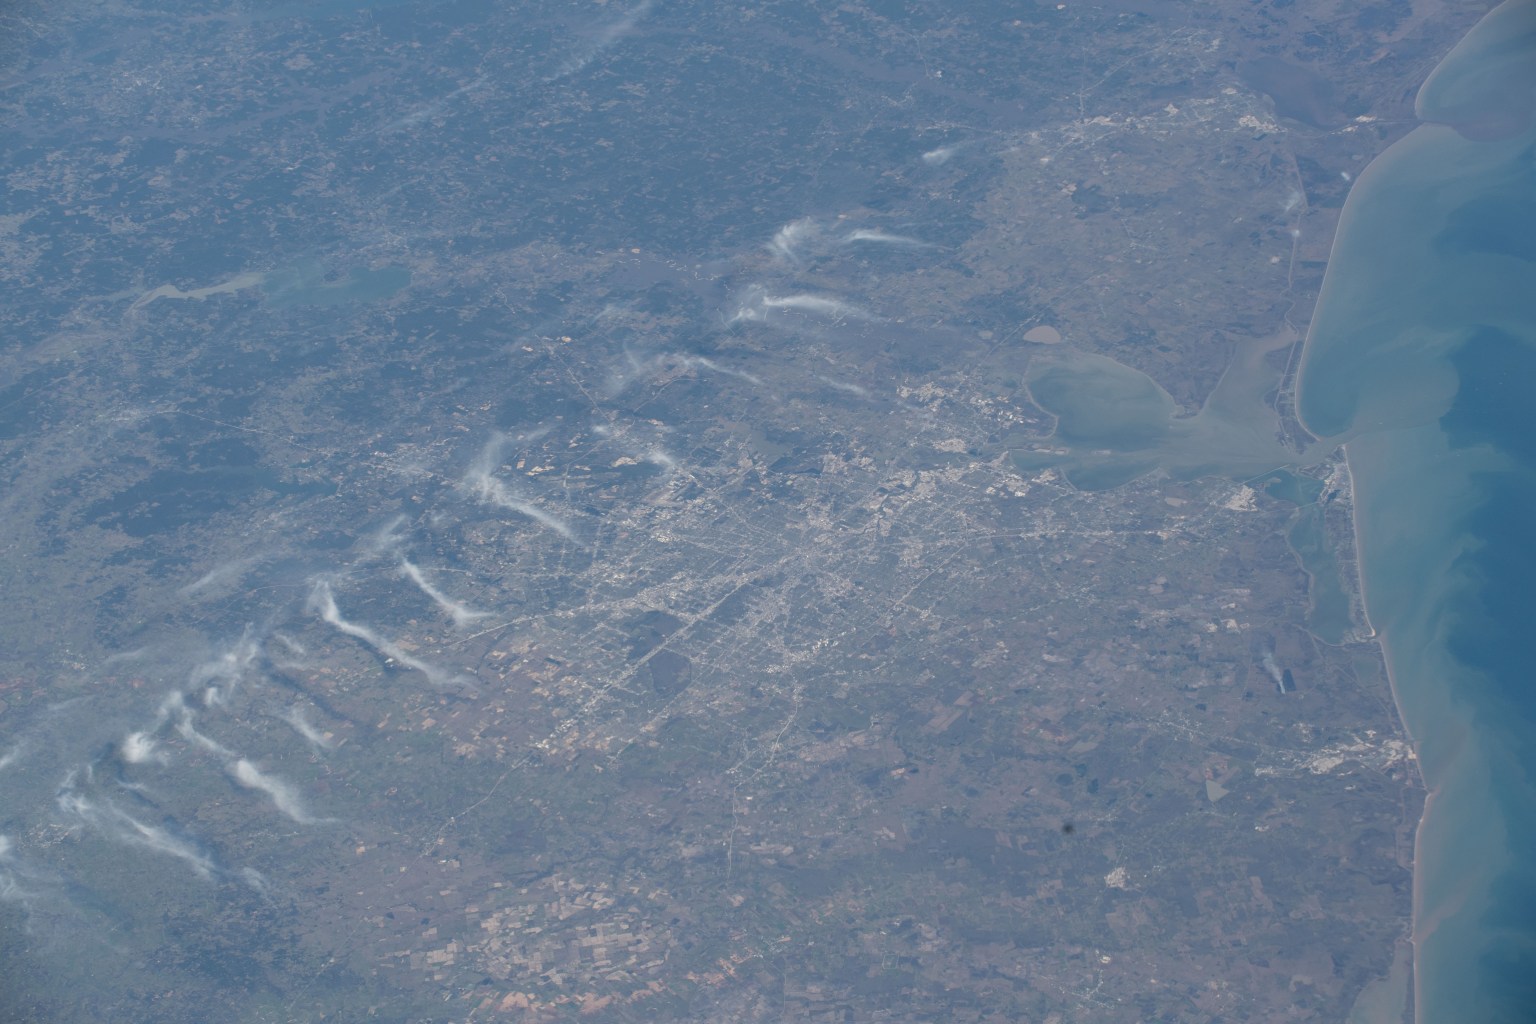 iss062e001720 (Feb. 7, 2020) --- This oblique view of Houston, Texas, was taken from the International Space Station as it was orbiting several hundreds of miles away over Mexico.